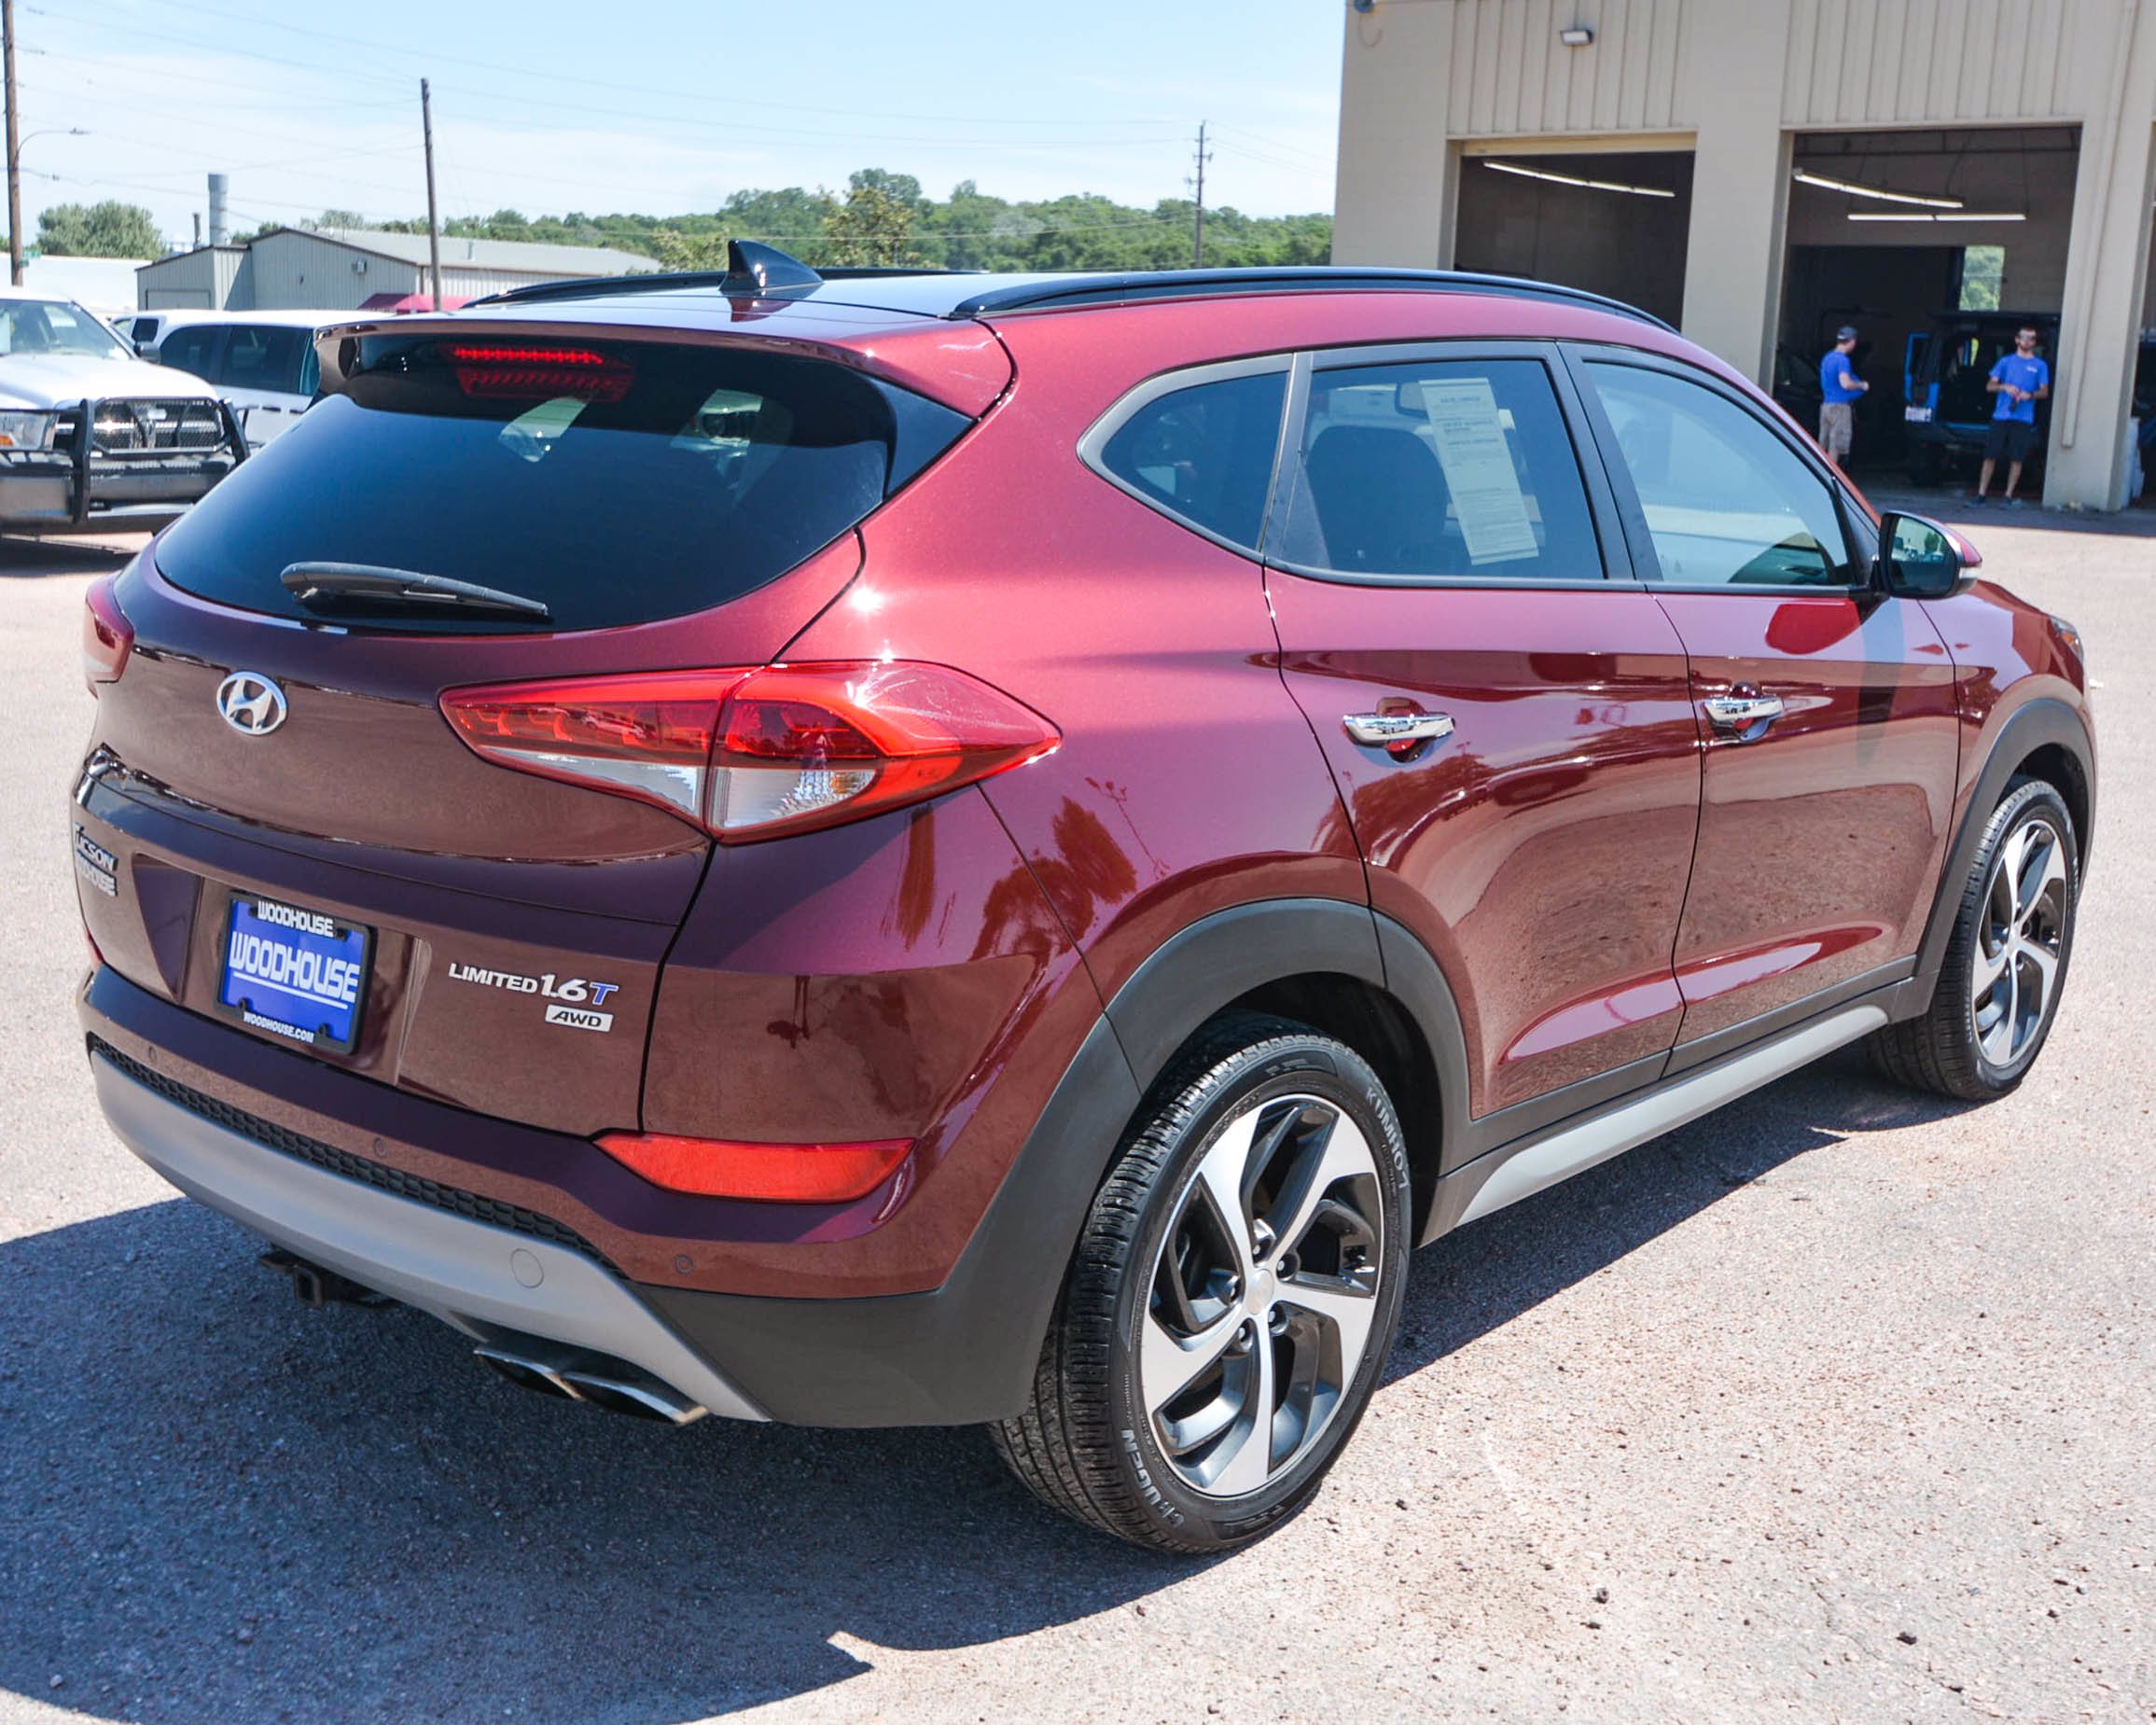 Pre-Owned 2018 Hyundai Tucson Limited With Navigation & AWD